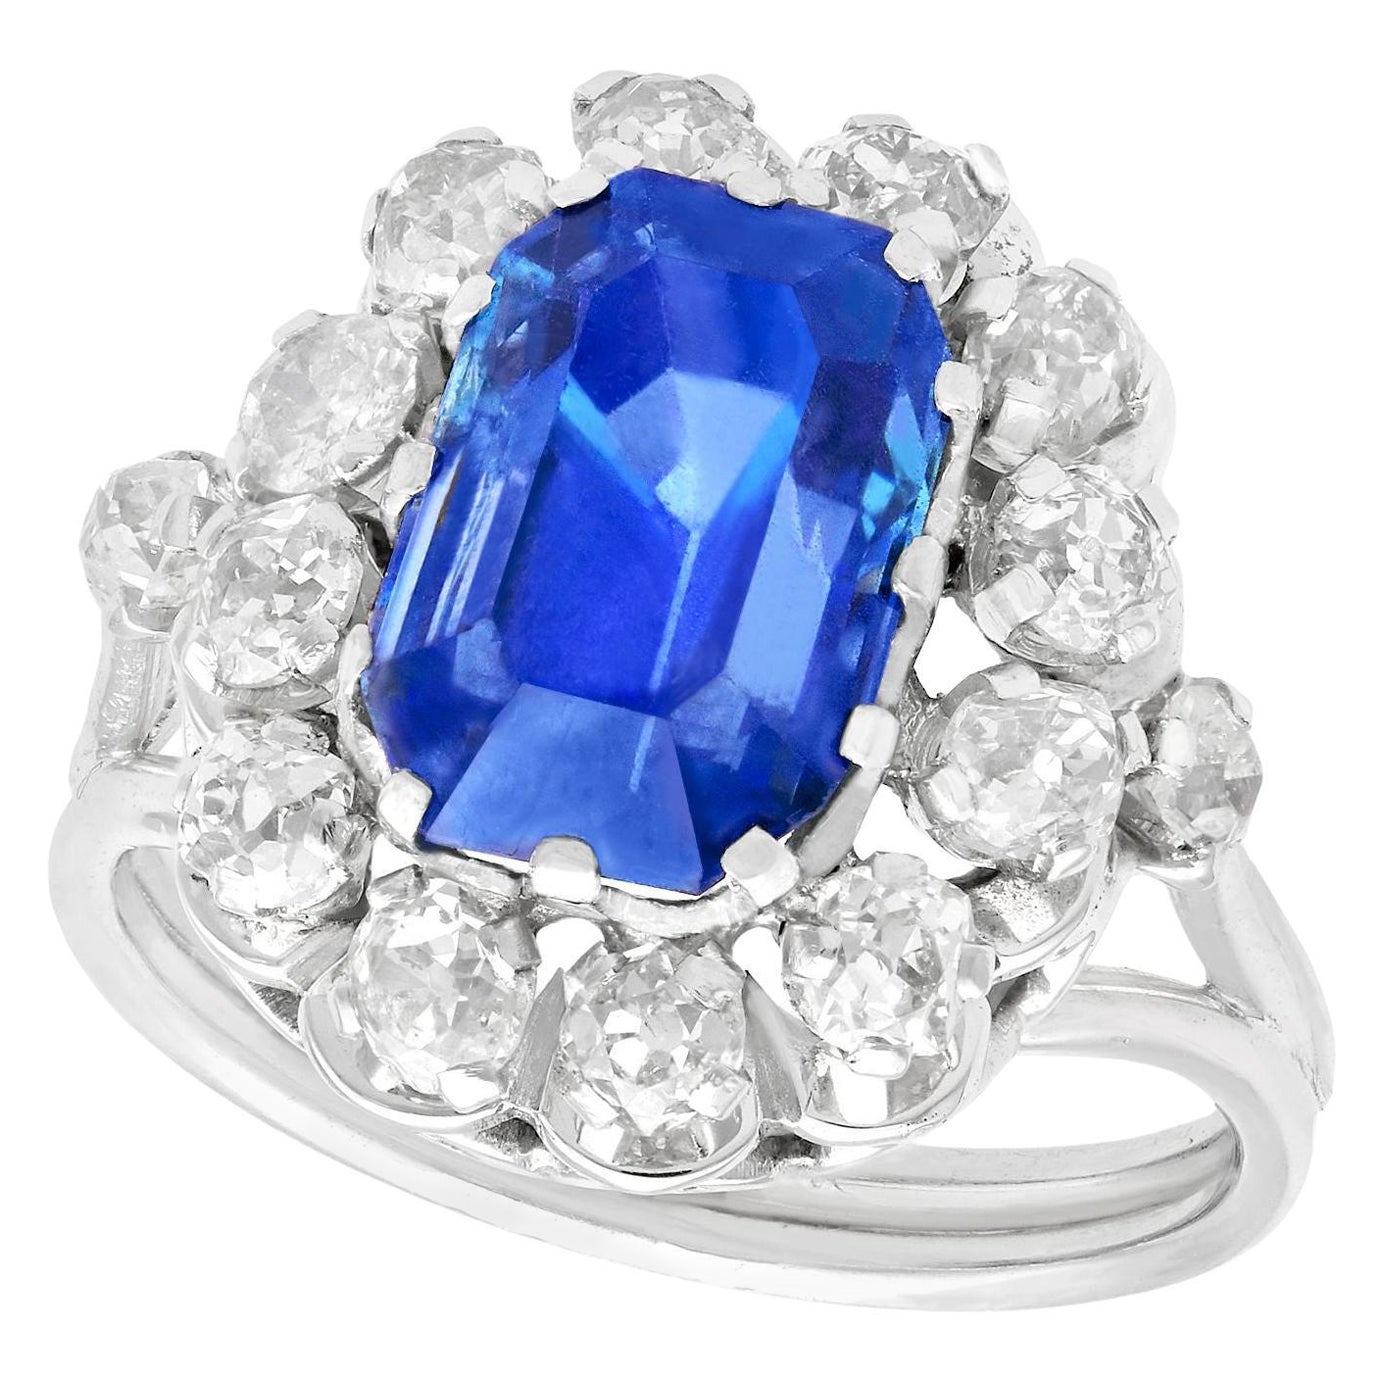 Vintage 1960s 6.53 Carat Sapphire and Diamond 18k White Gold Cocktail Ring